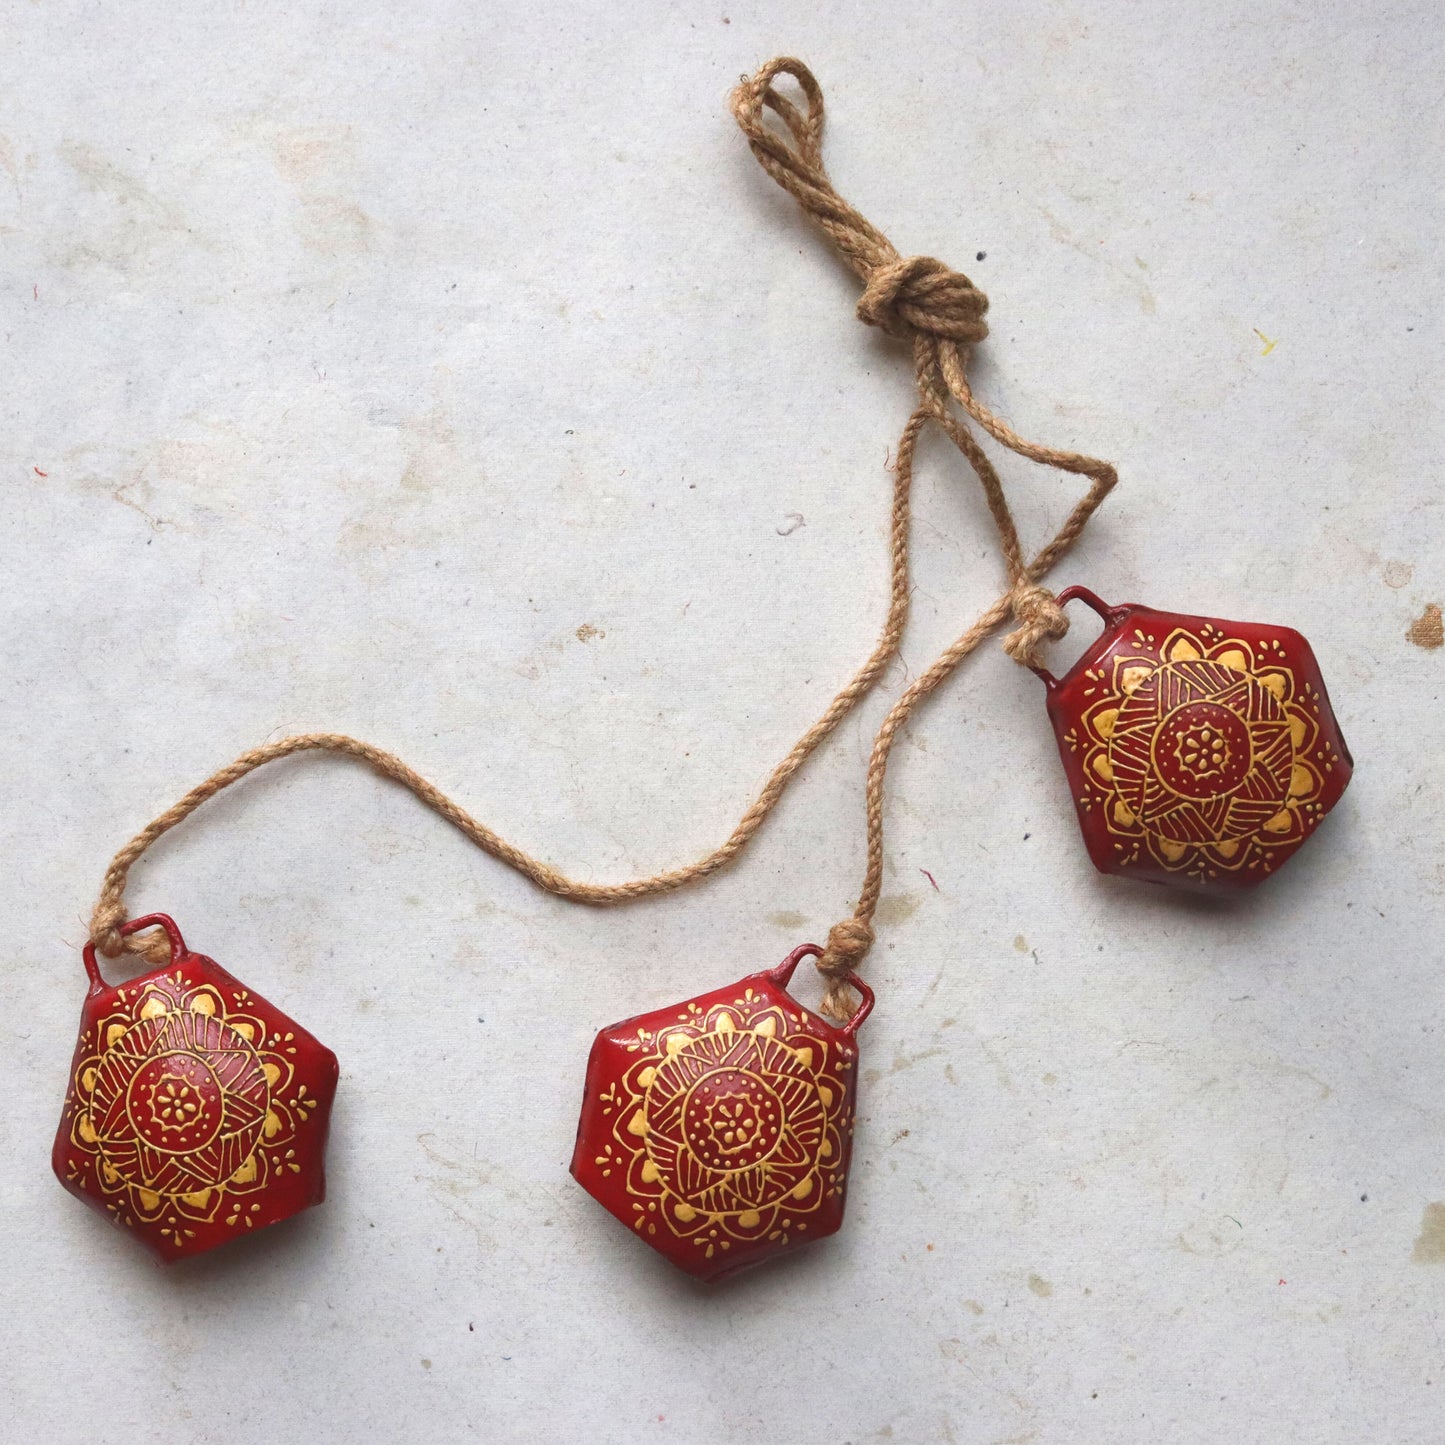 Set of 3 Red Cow Bells - Gold Motif, Hand Painted, Decorative Wall Hanging - Aksa Home Decor 